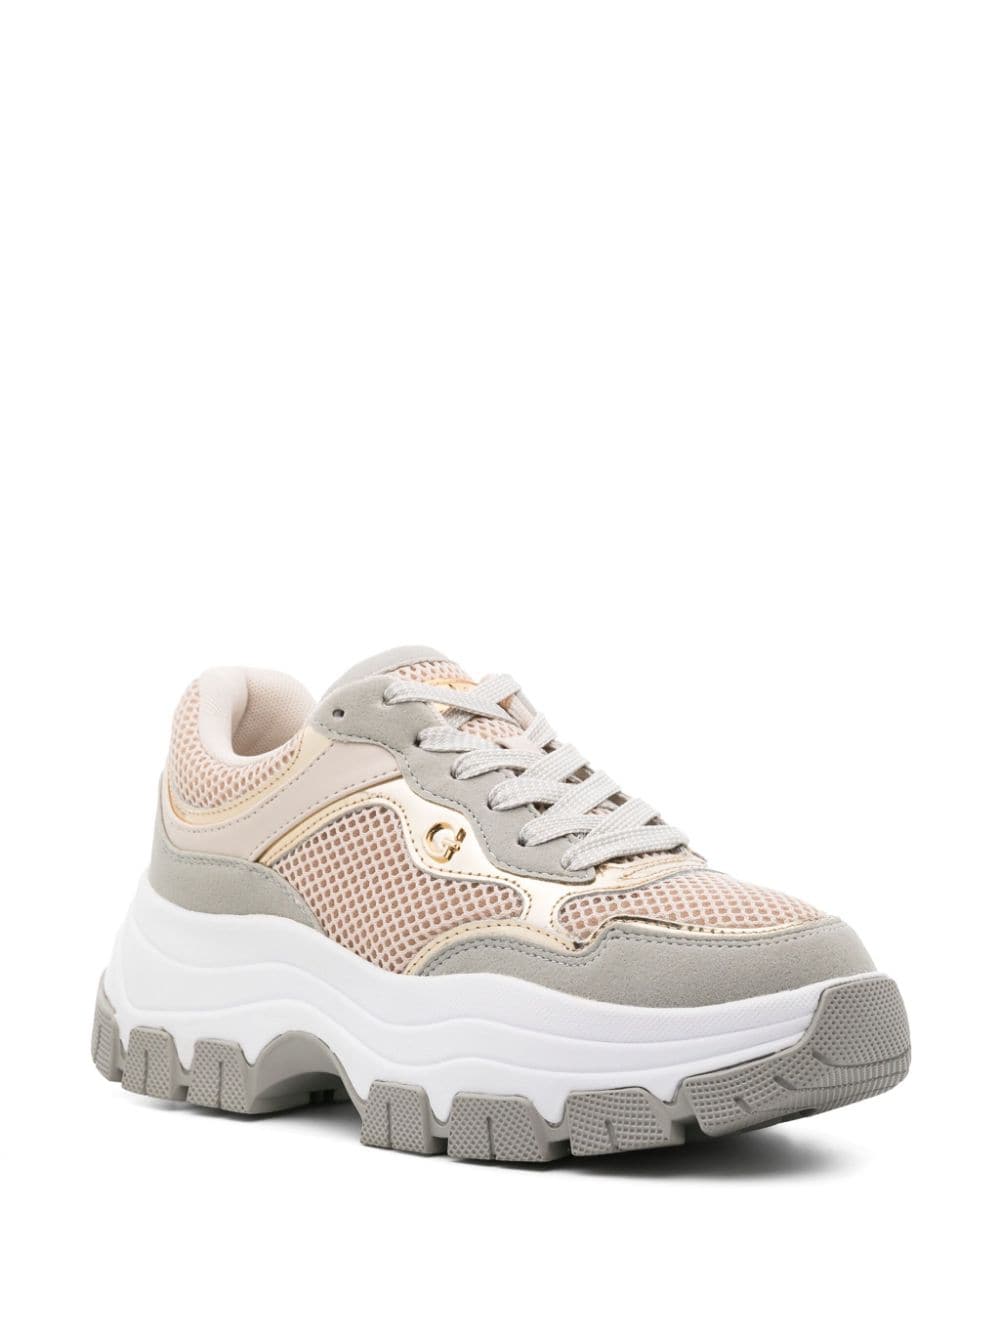 GUESS USA Brecky chunky mesh sneakers - Beige